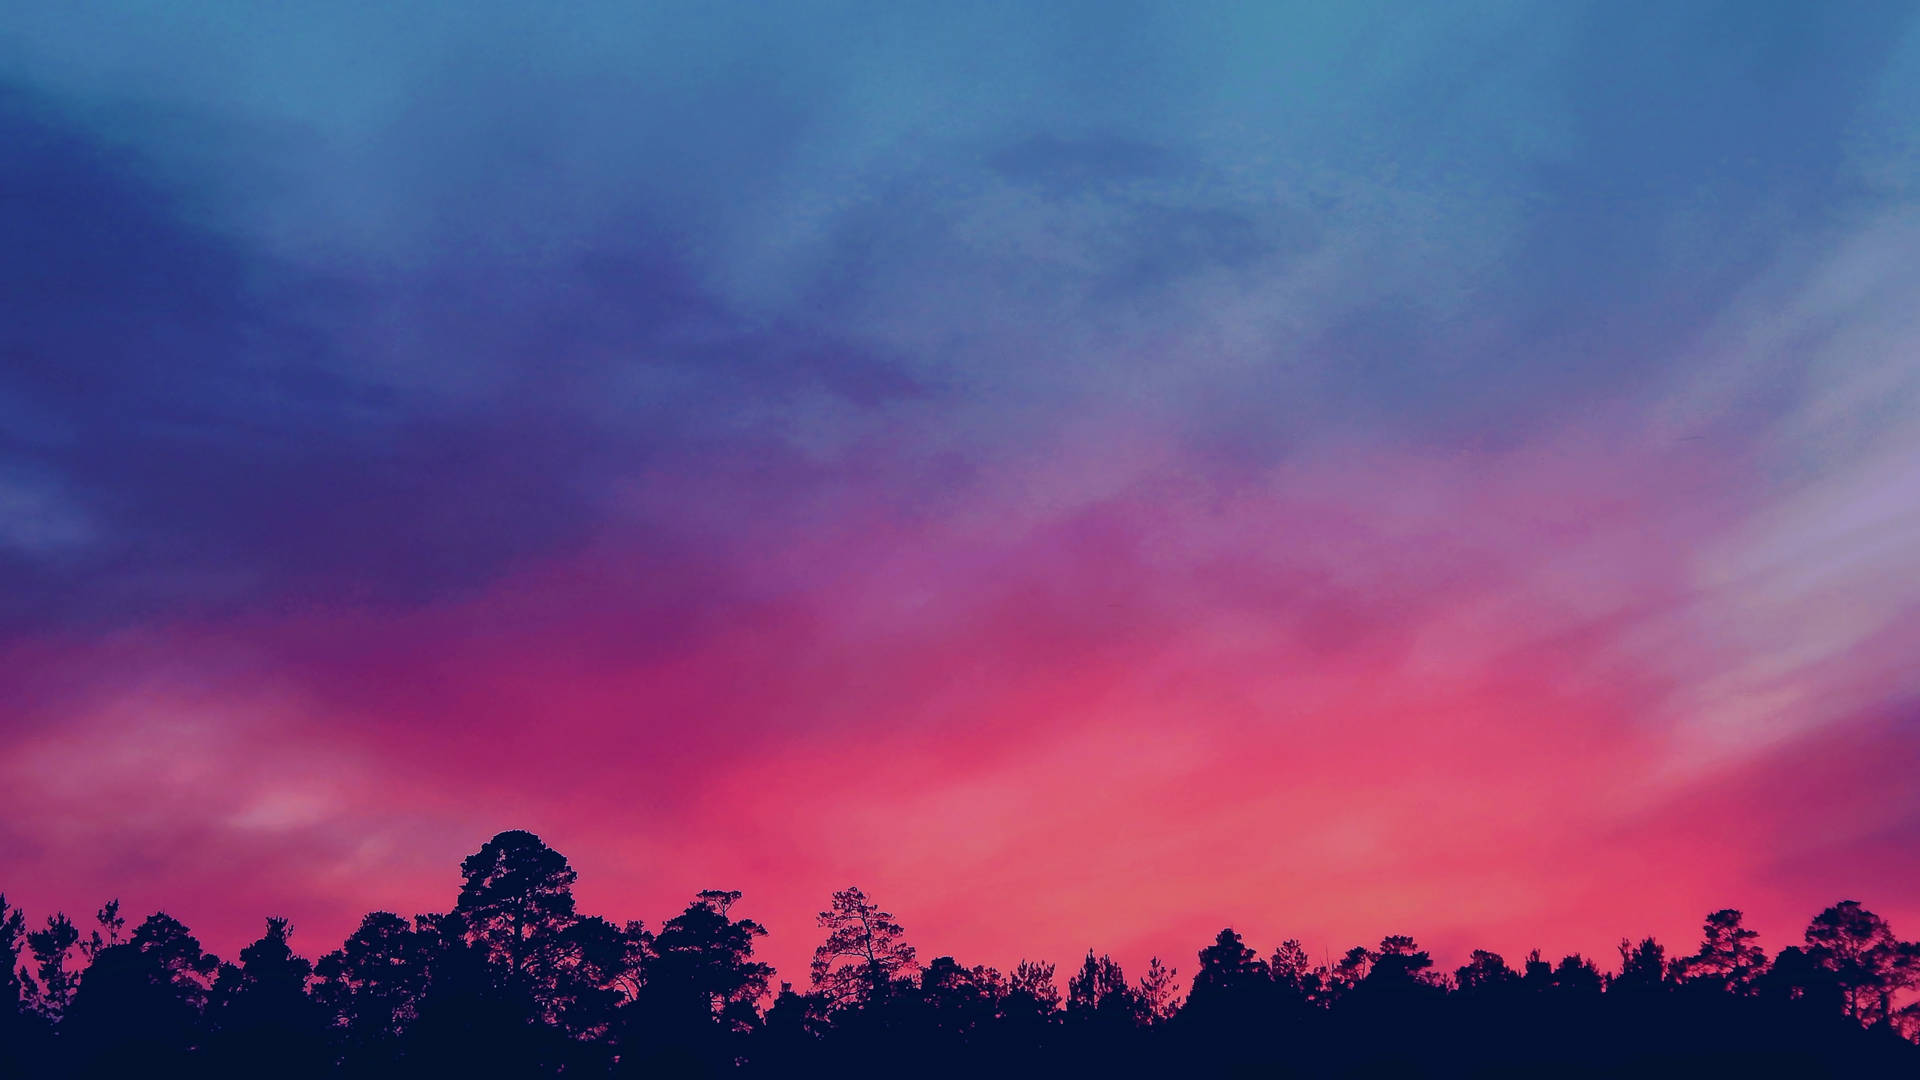 Aesthetic Sky In Pink And Blue